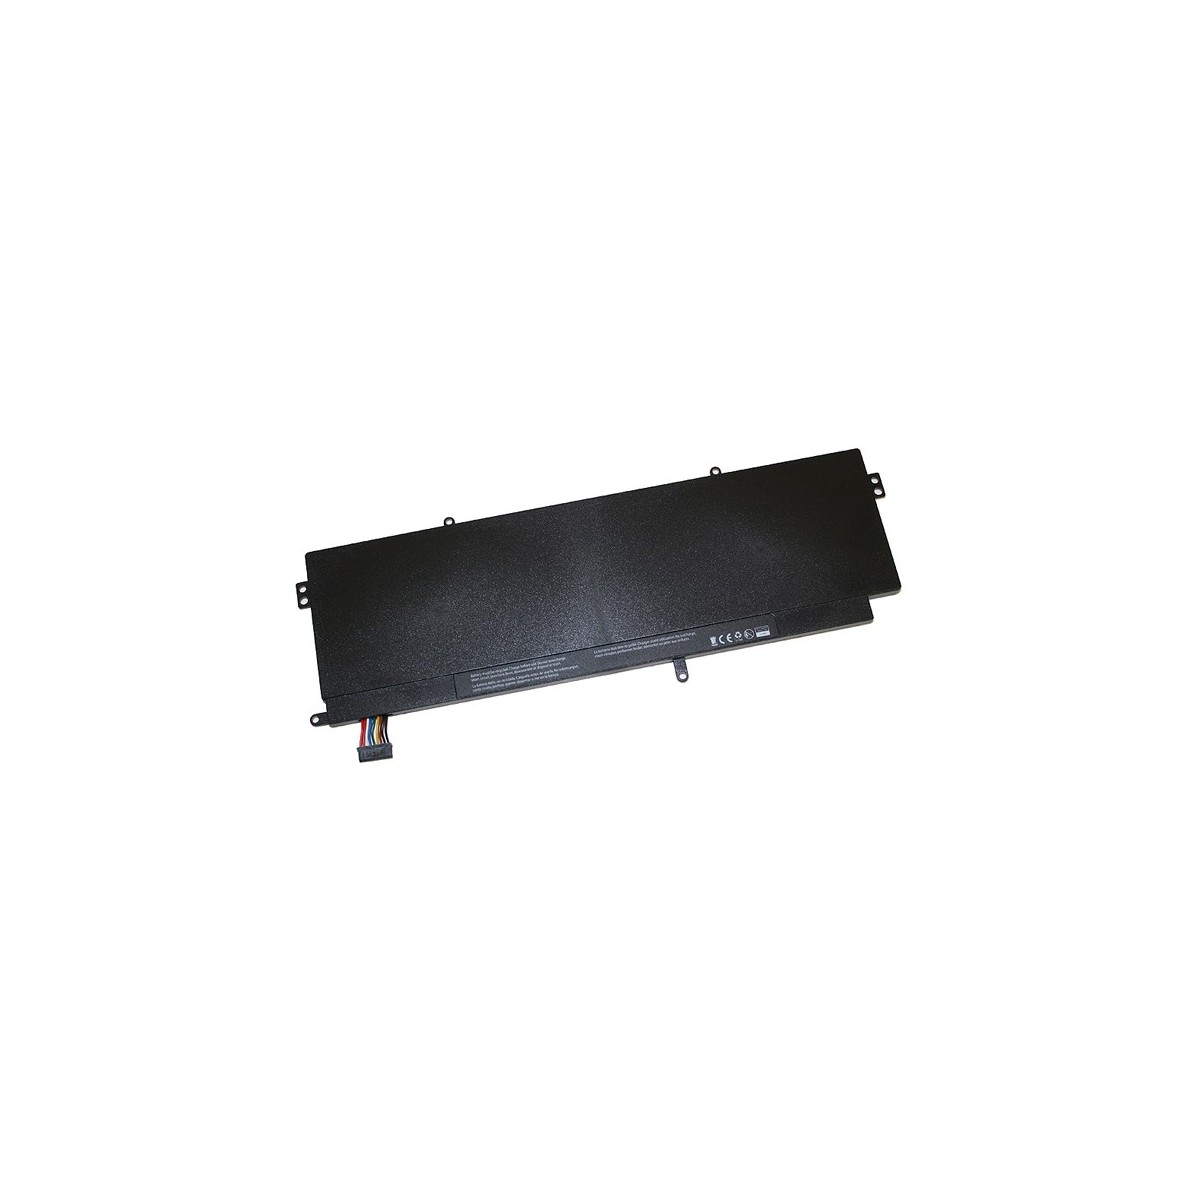 Origin Storage Dell Battery 7280 4 Cell 60WHR OEM:DM3WC - Battery - DELL - Dell 7280